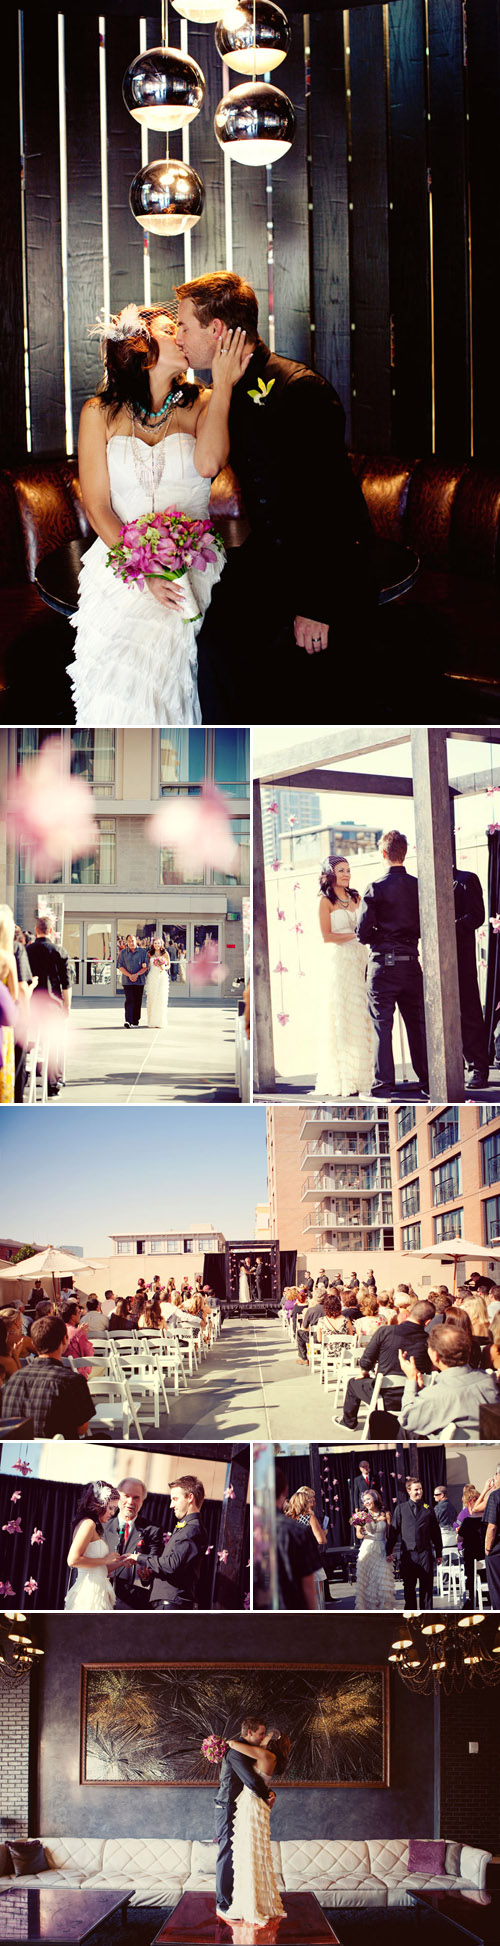 San Diego Hard Rock Hotel real wedding ceremony, pink and black wedding color palette, images by Sarah Yates Photography